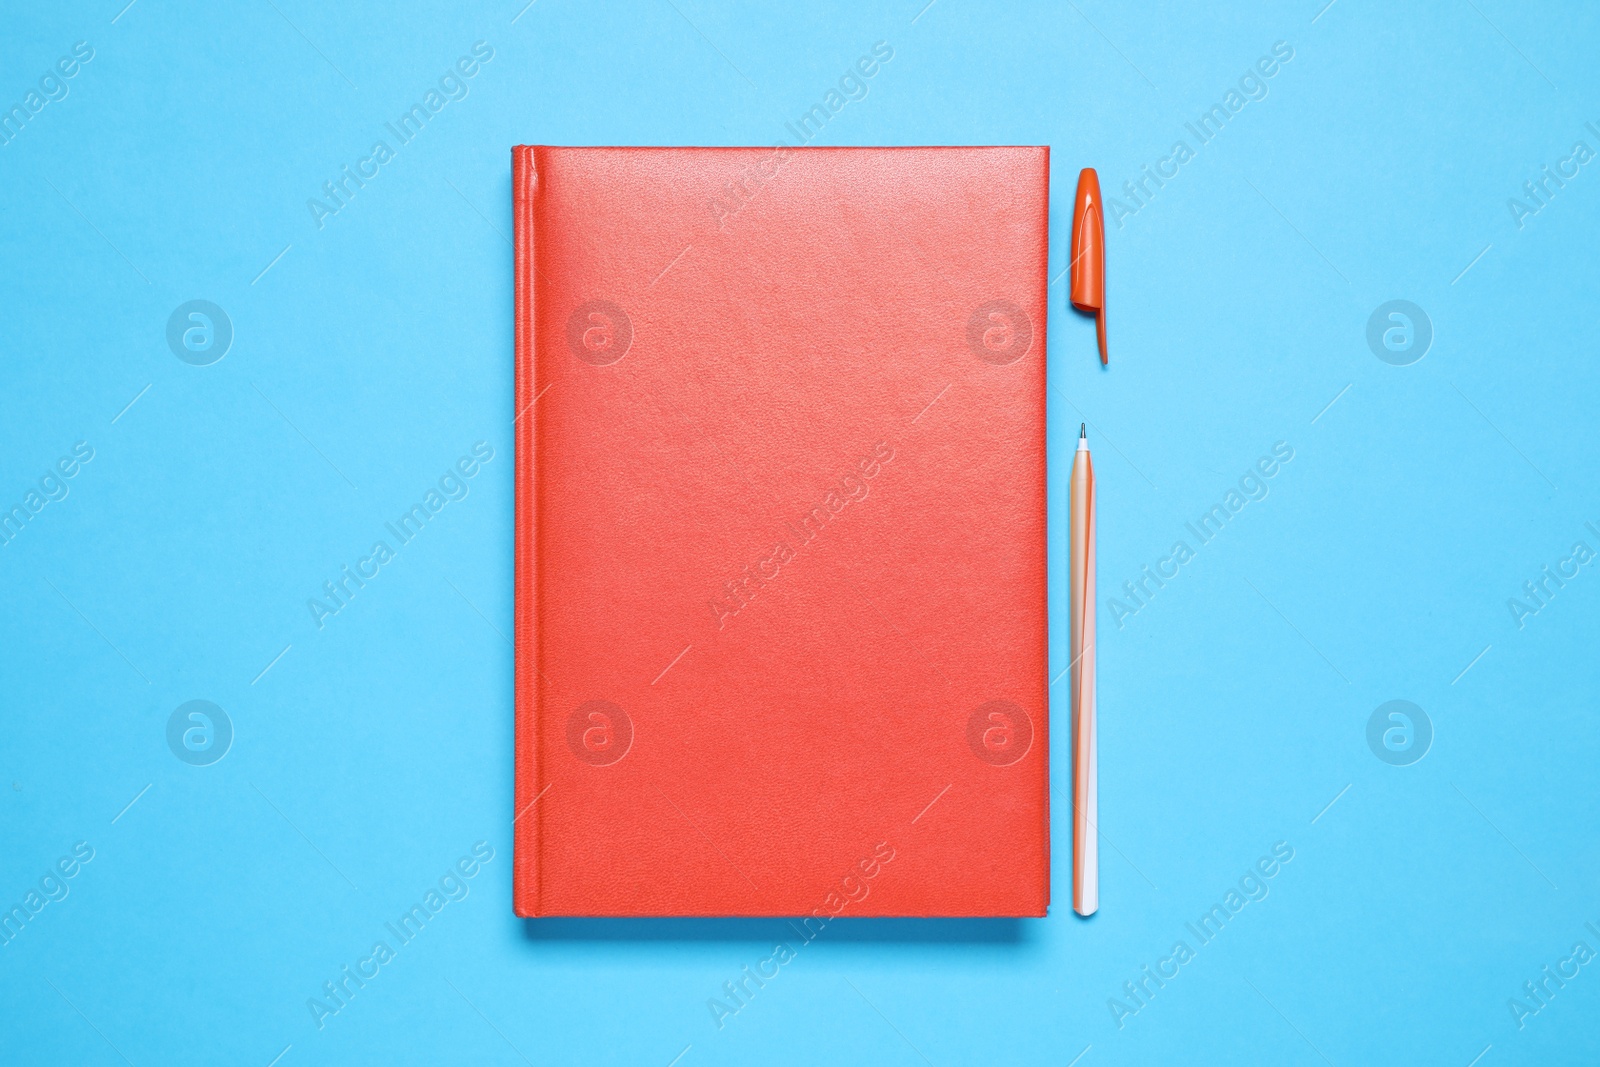 Photo of Stylish red notebook and pen on light blue background, flat lay